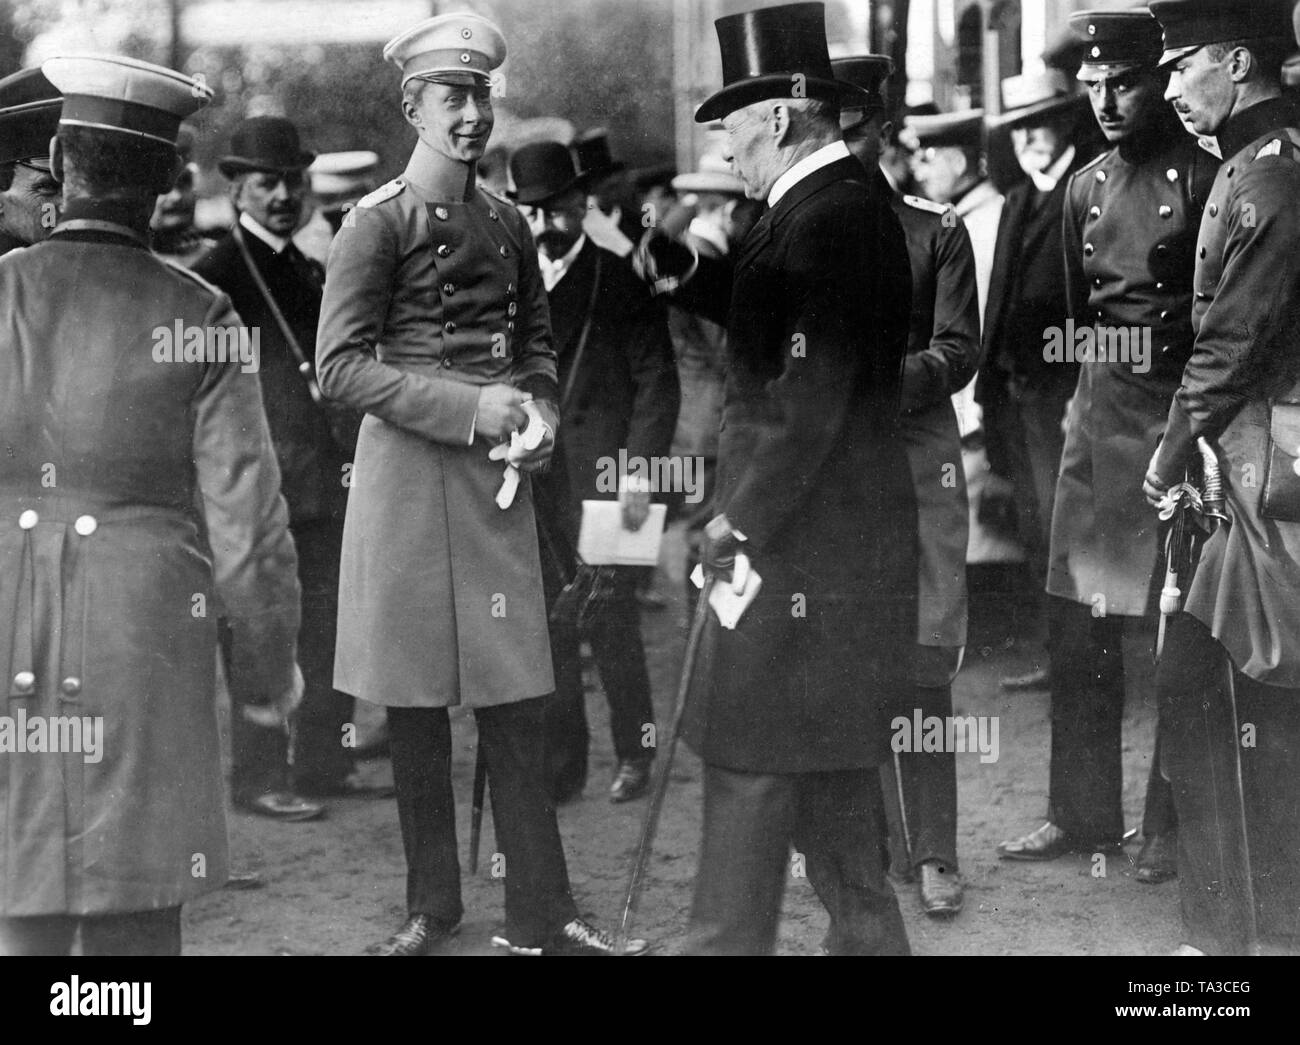 Crown Prince Wilhelm (2nd from left) in conversation with General von Schmidt-Pauli (3rd from the left) during the cycling race 'The Grand Prix of Karlshorst'. Stock Photo